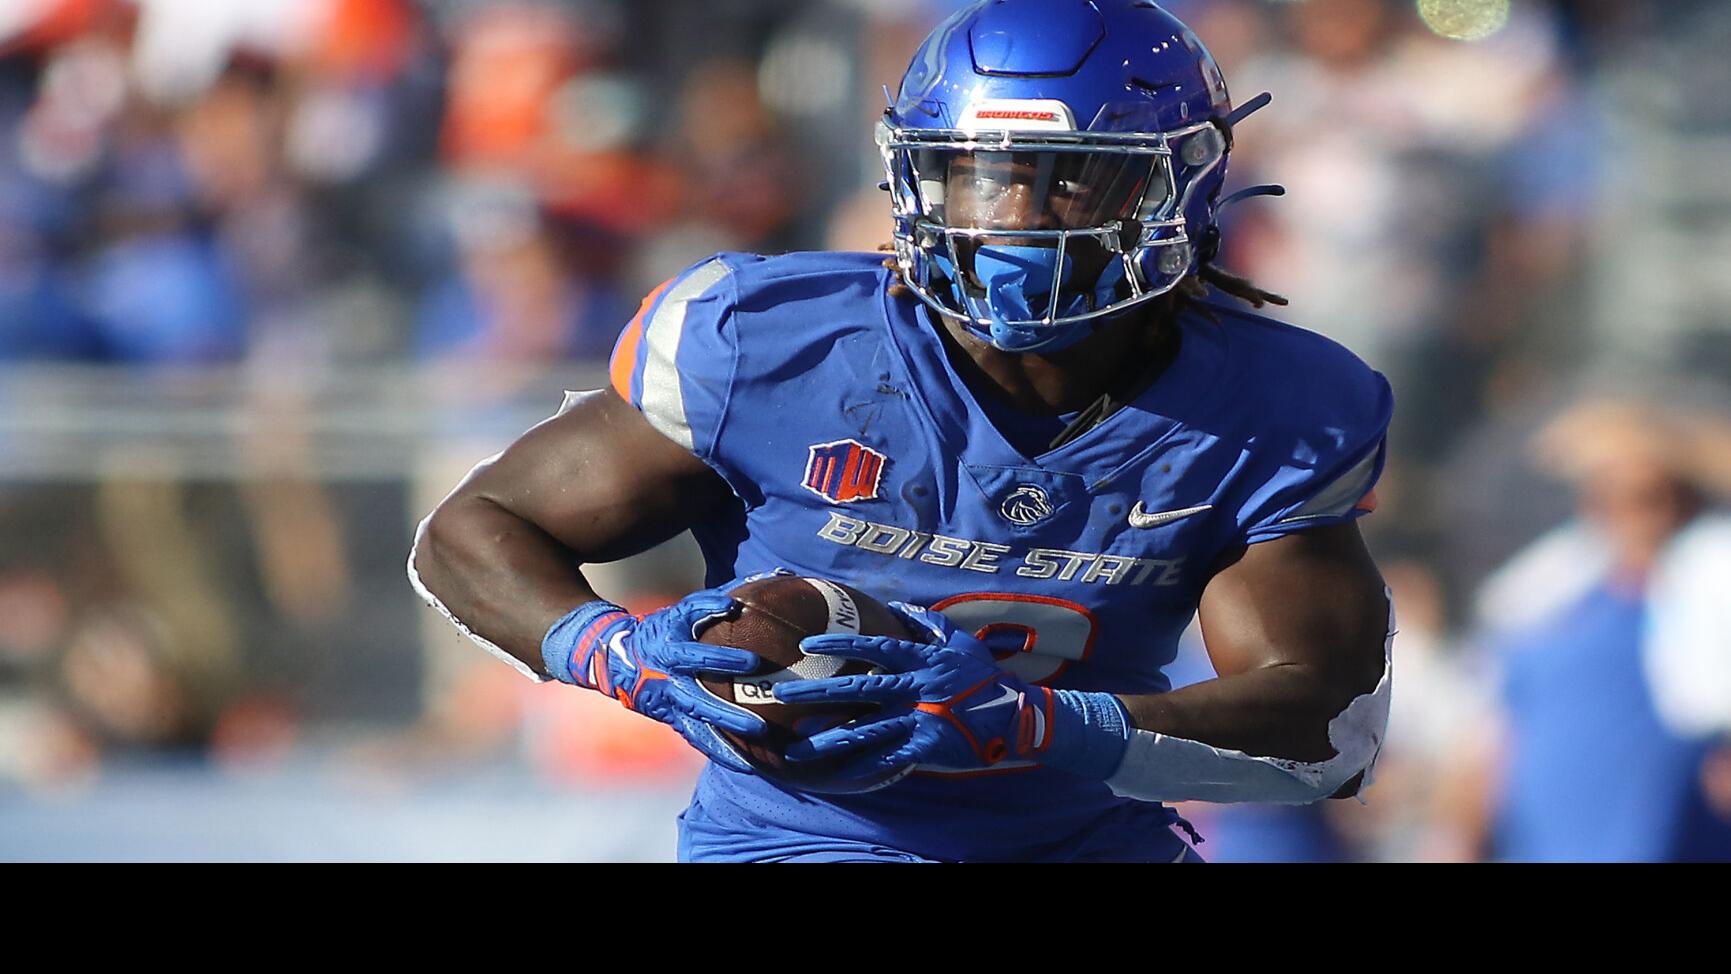 UCF vs. Boise State: How to watch game on TV, streaming